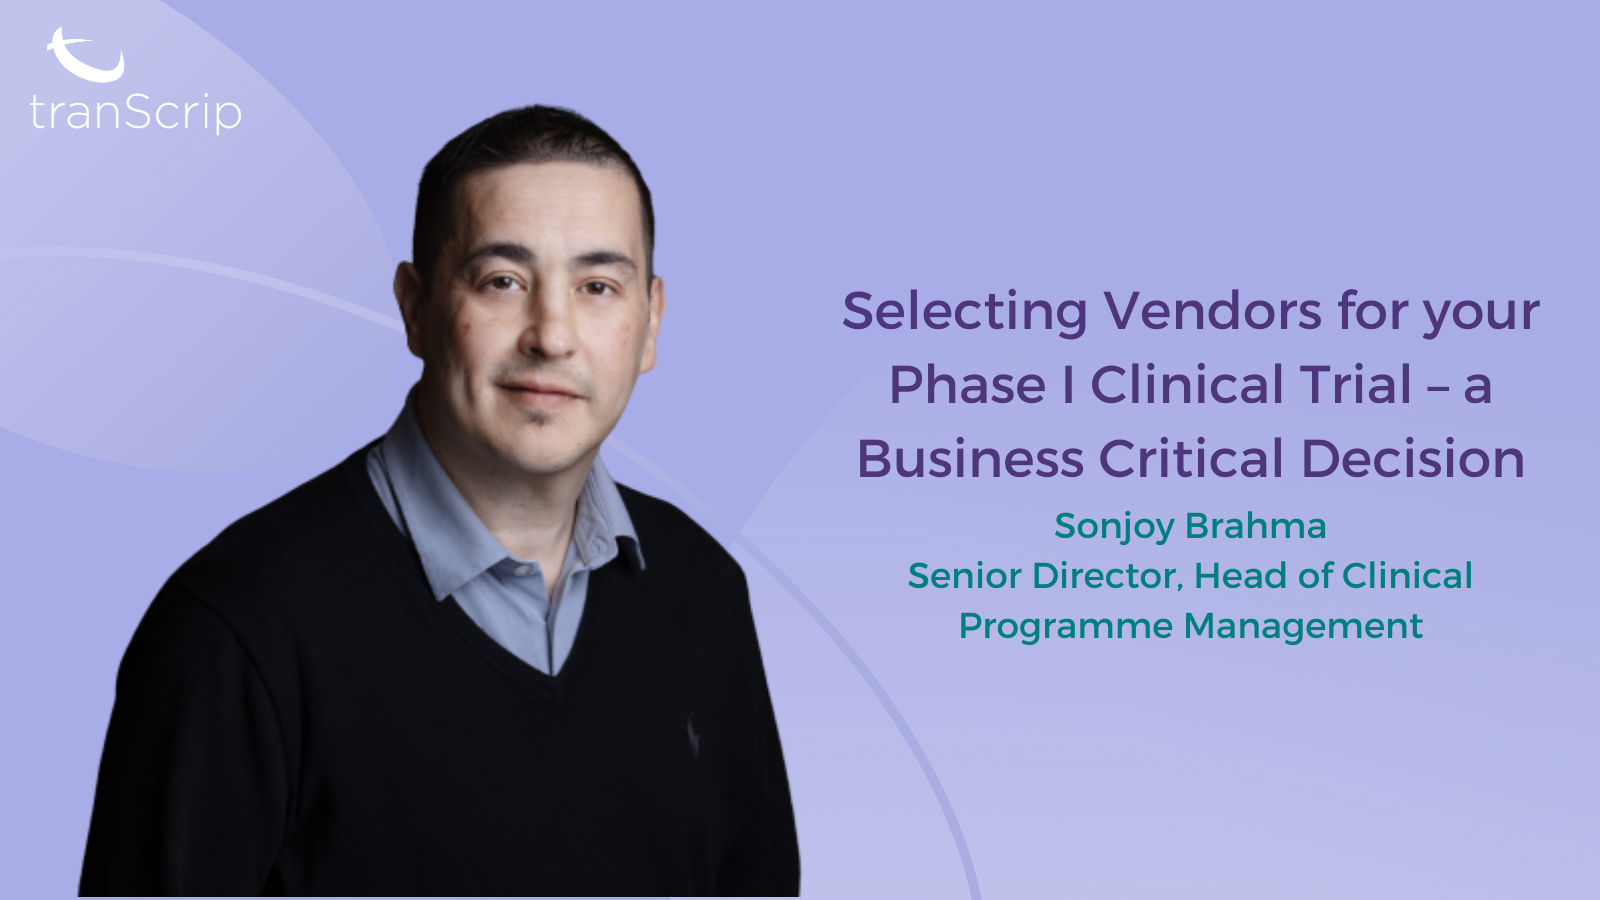 Selecting Vendors for your Phase I Clinical Trial – a Business Critical Decision Featured Image